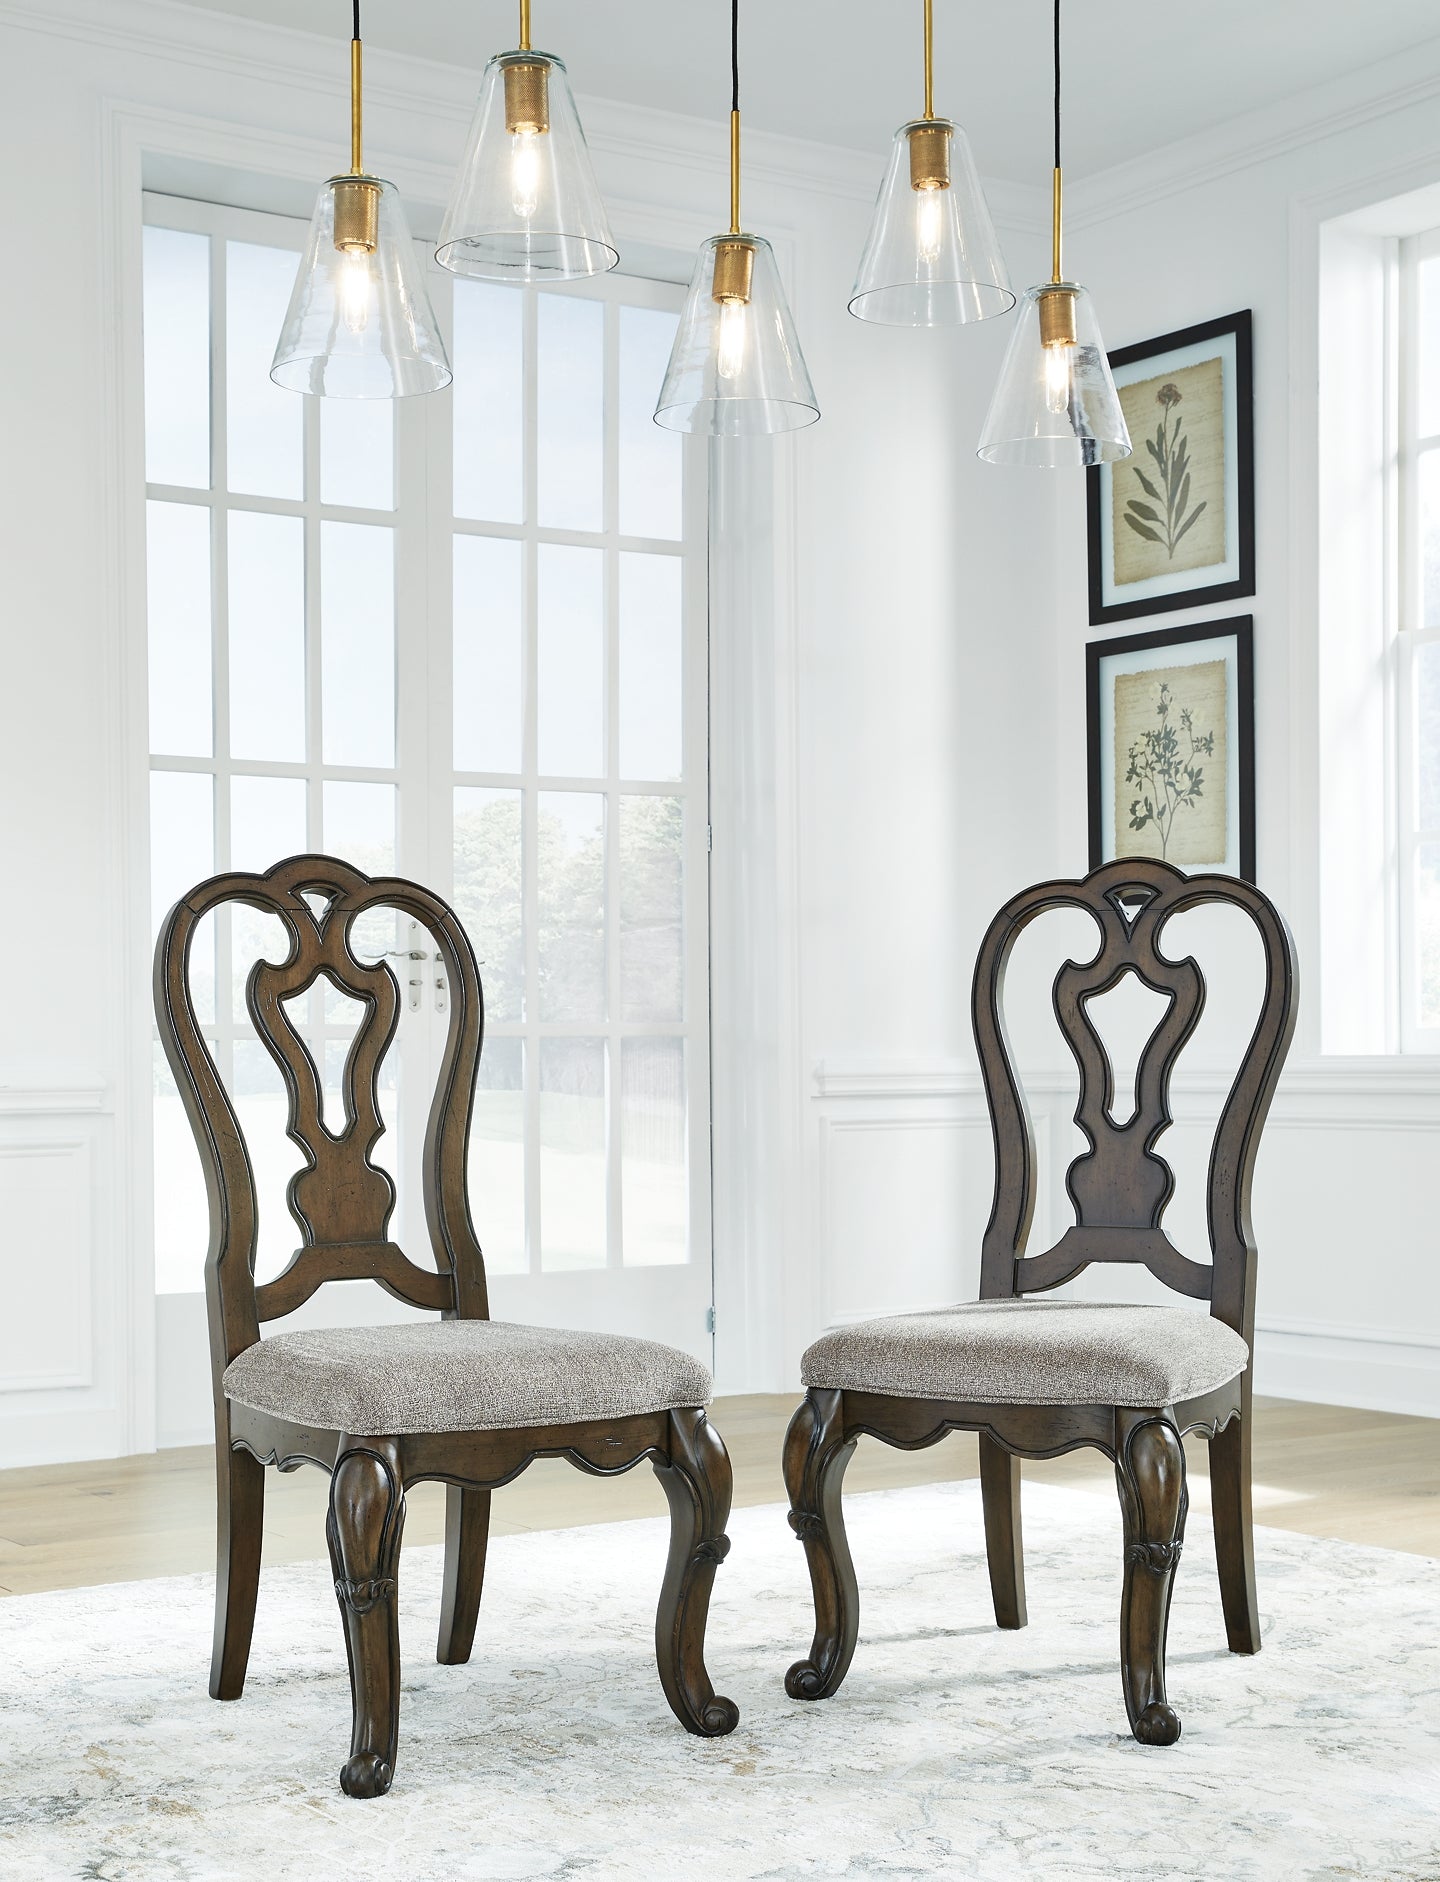 Maylee Dining Table and 4 Chairs Signature Design by Ashley®